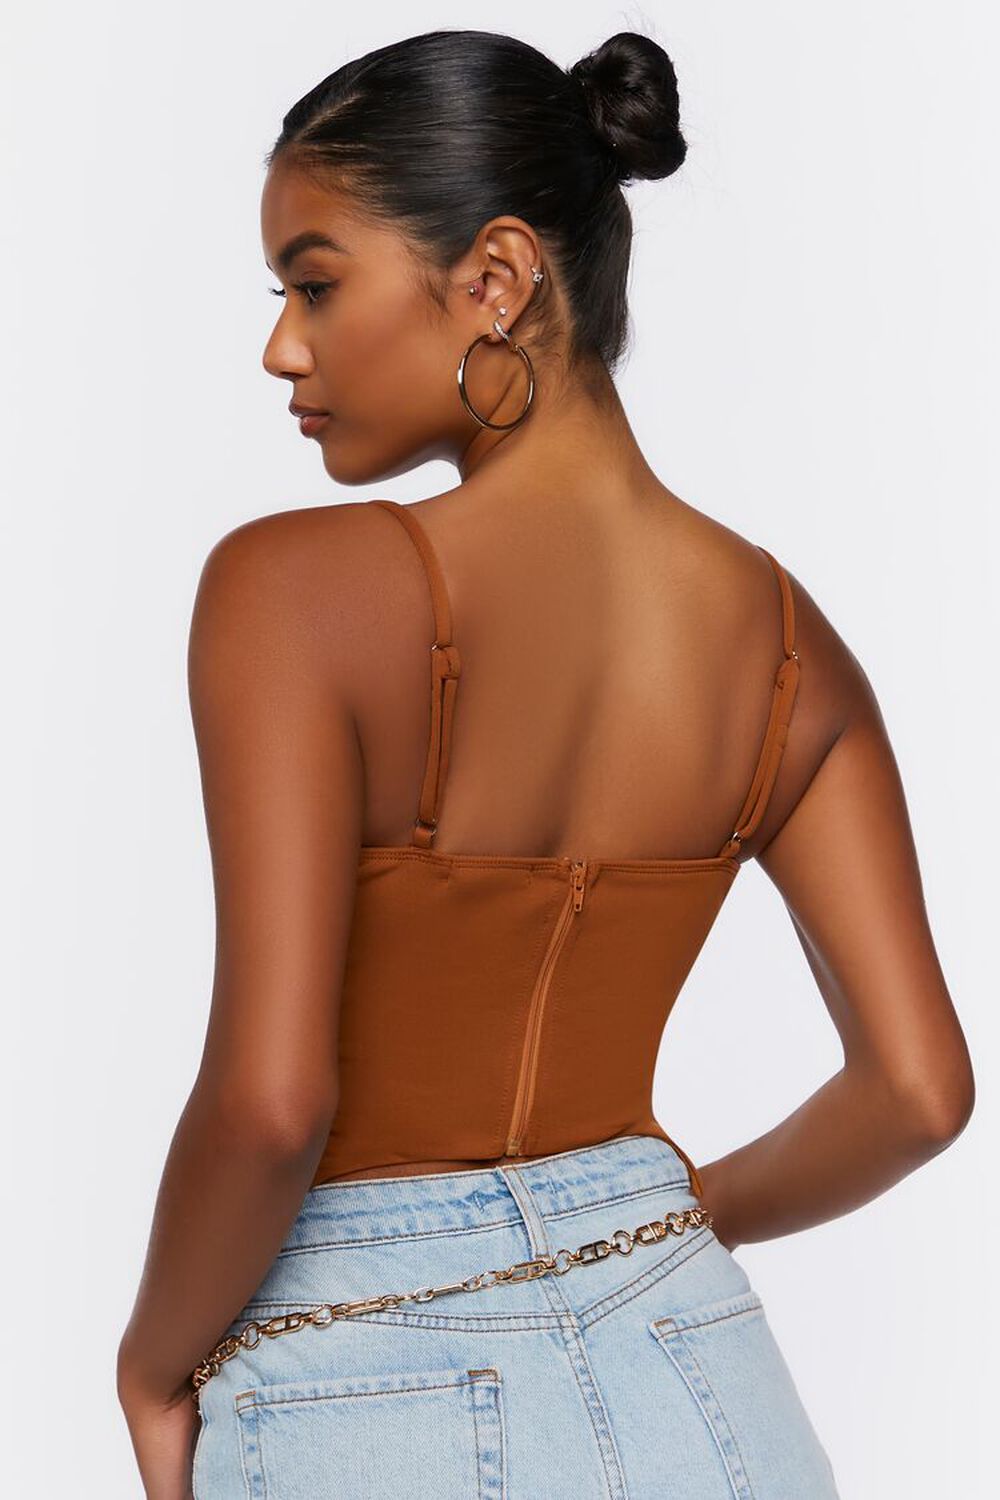 CAMEL Cropped Bustier Cami, image 3